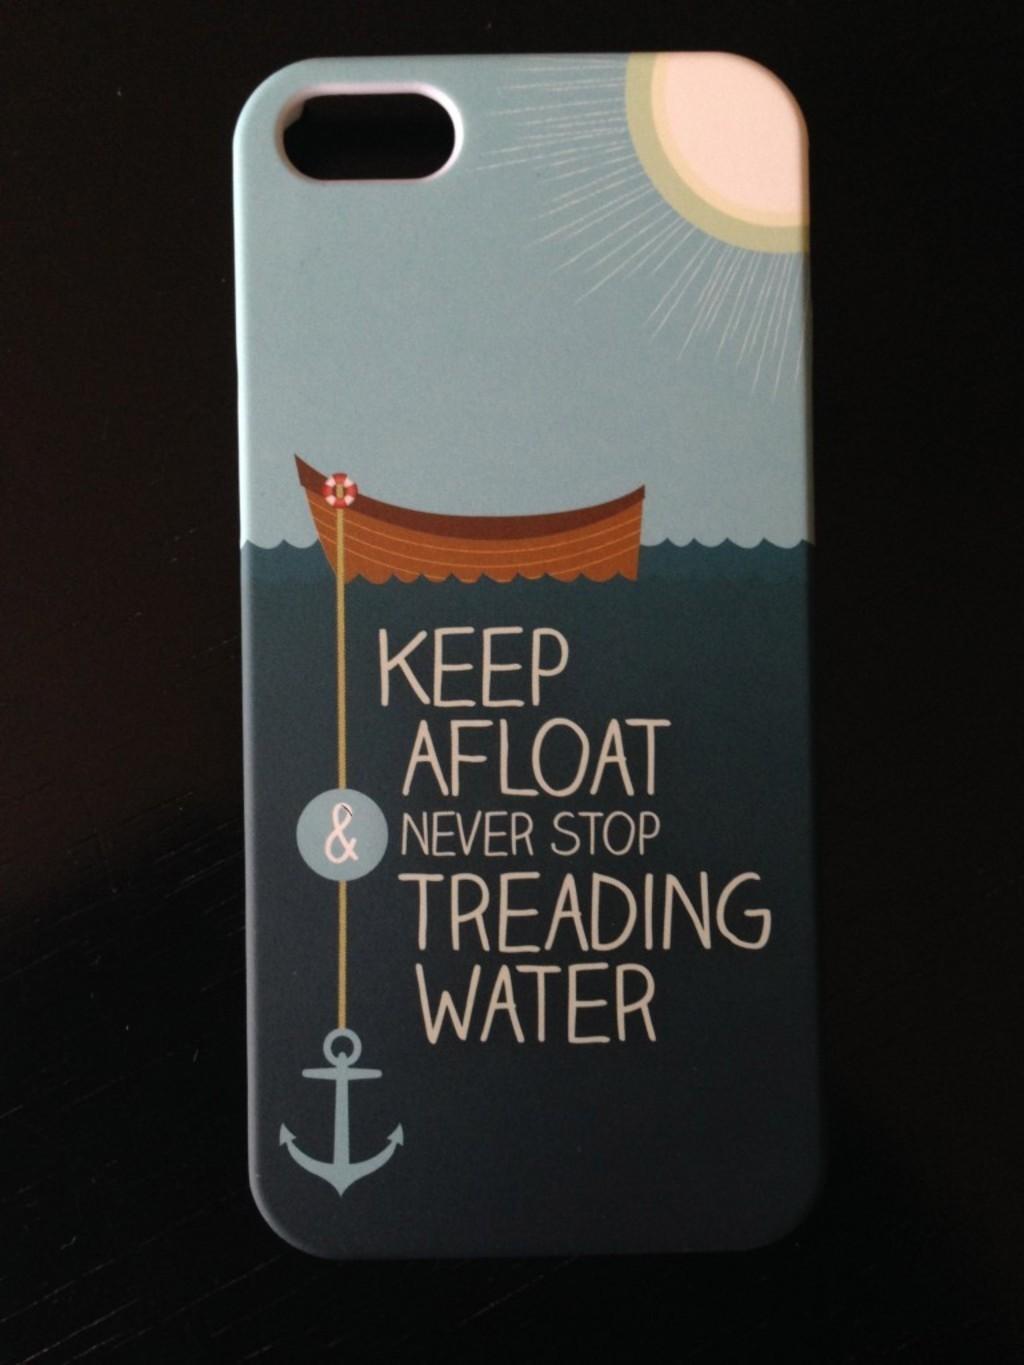 October Phone Case of the Month